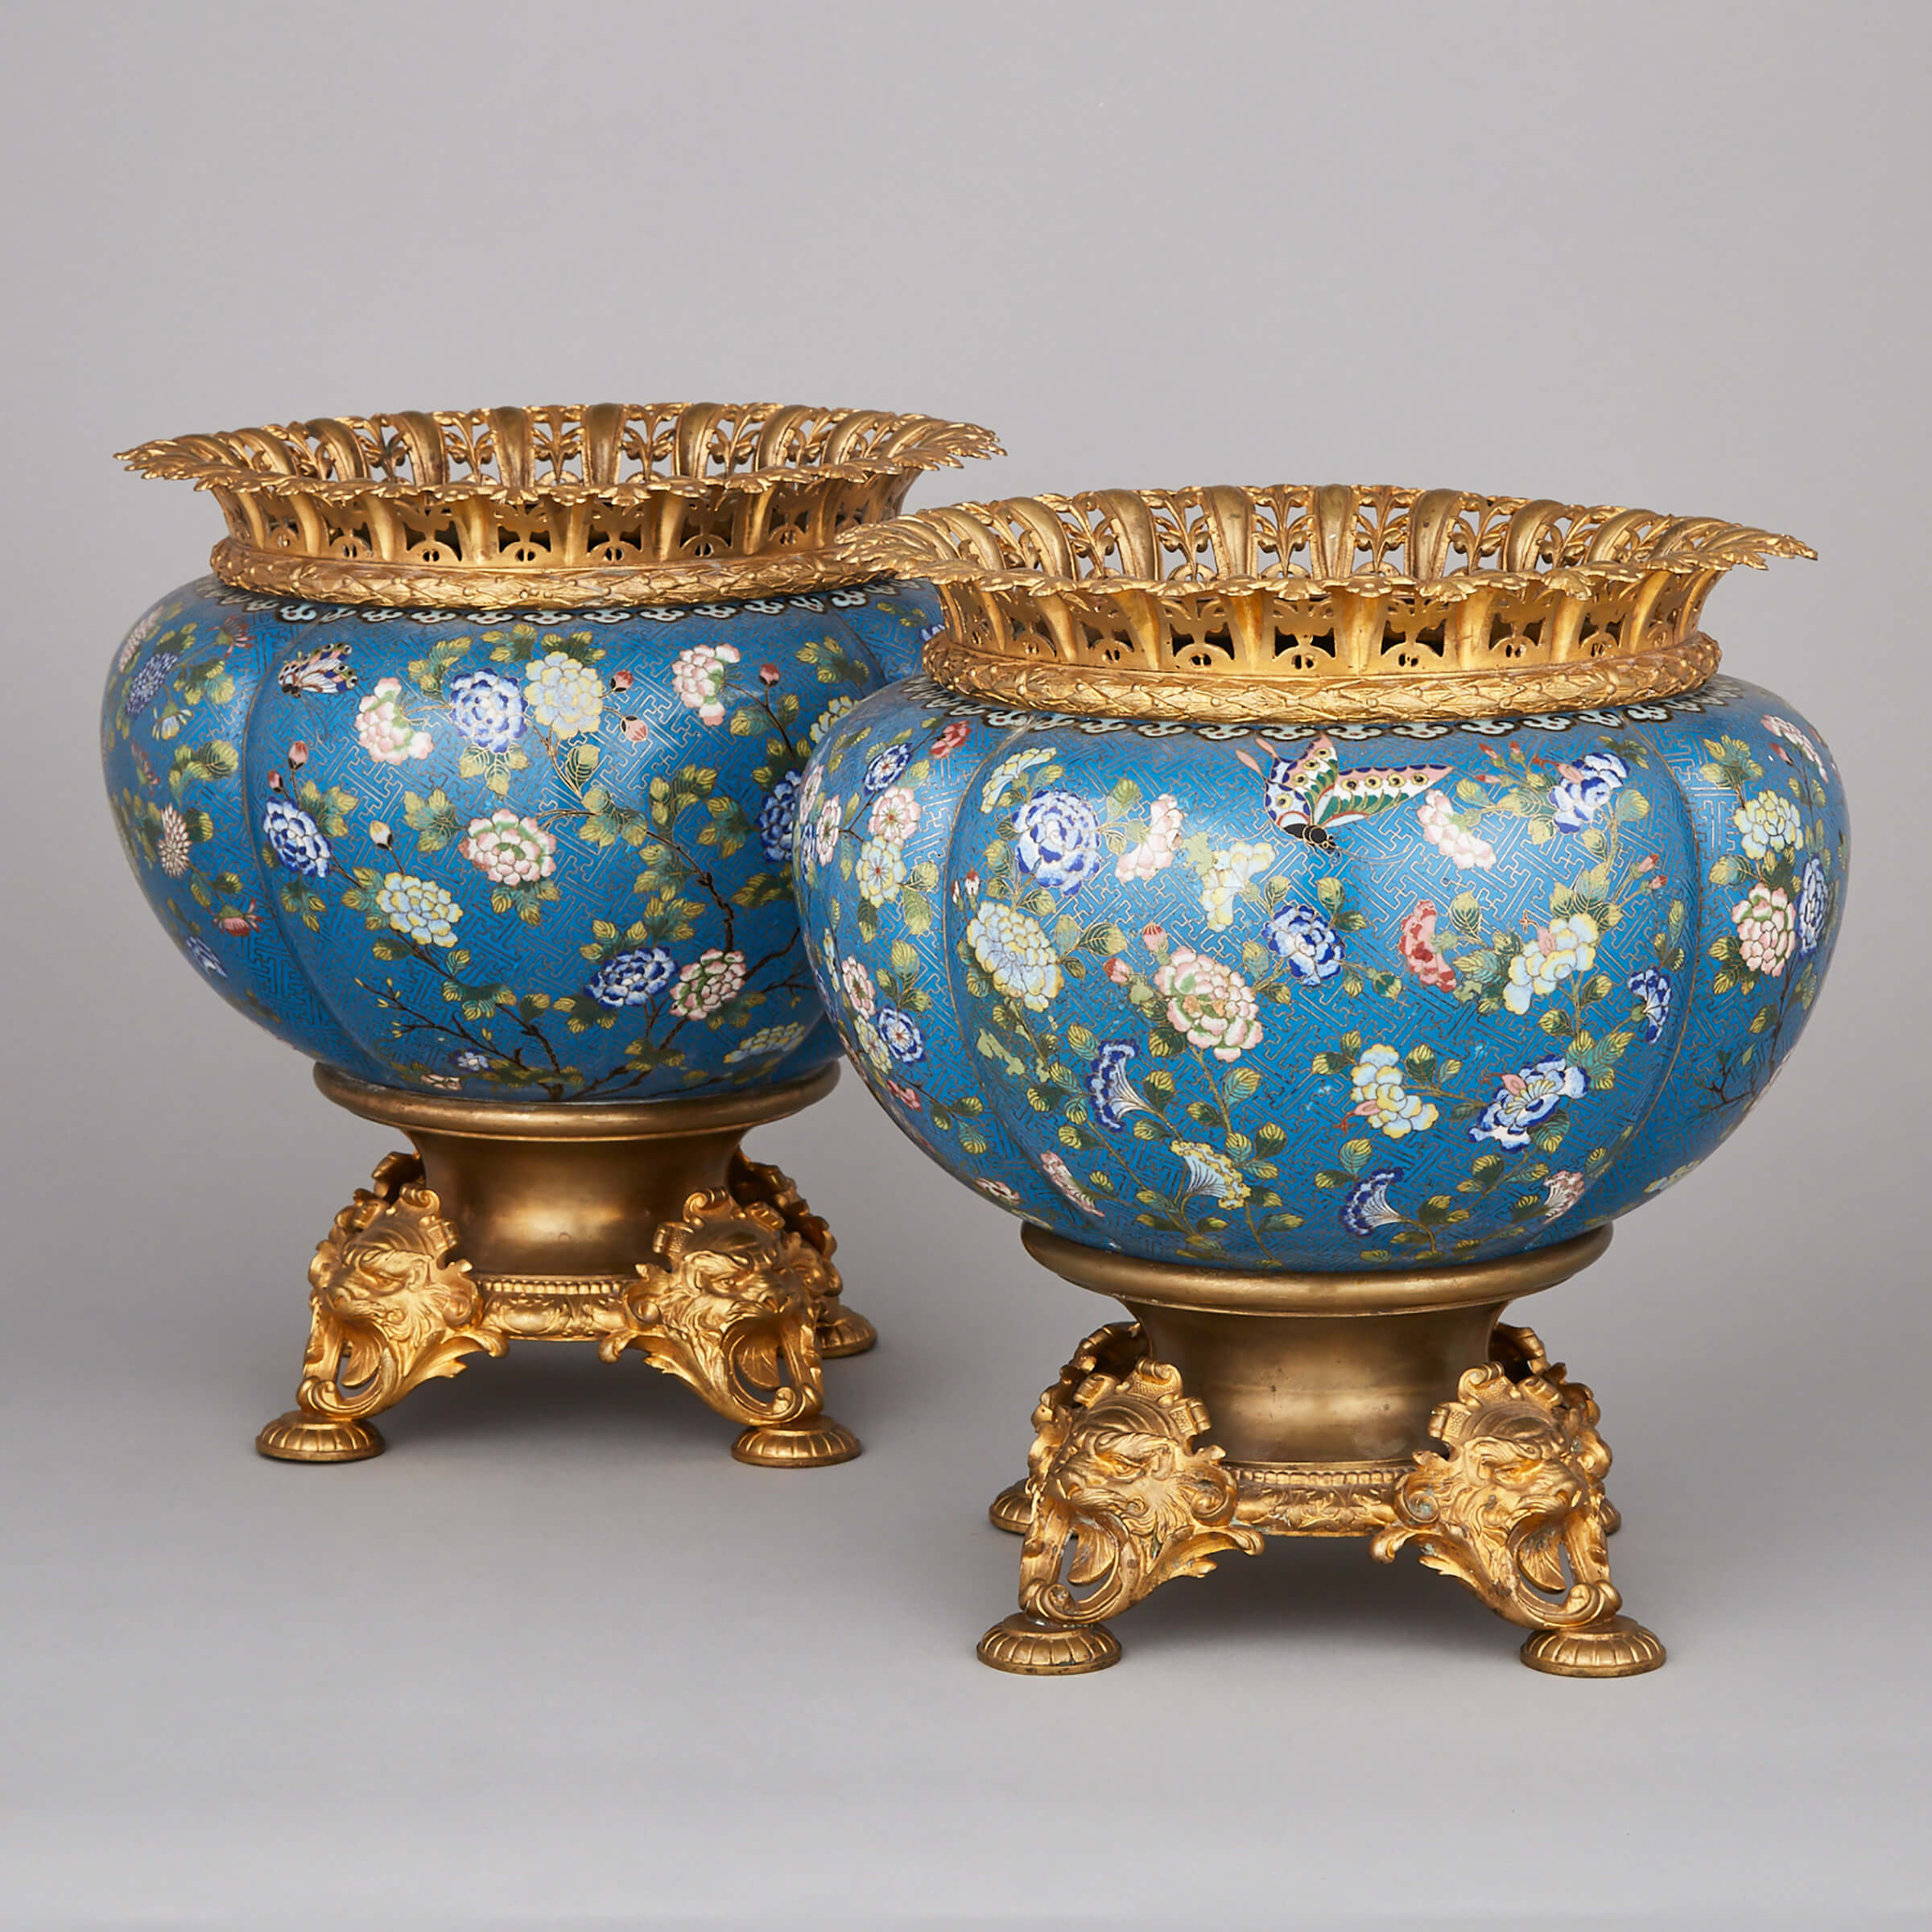 Pair of French Japonisme Ormolu Mounted Cloisonné Enamelled Jardinieres, late 19th century